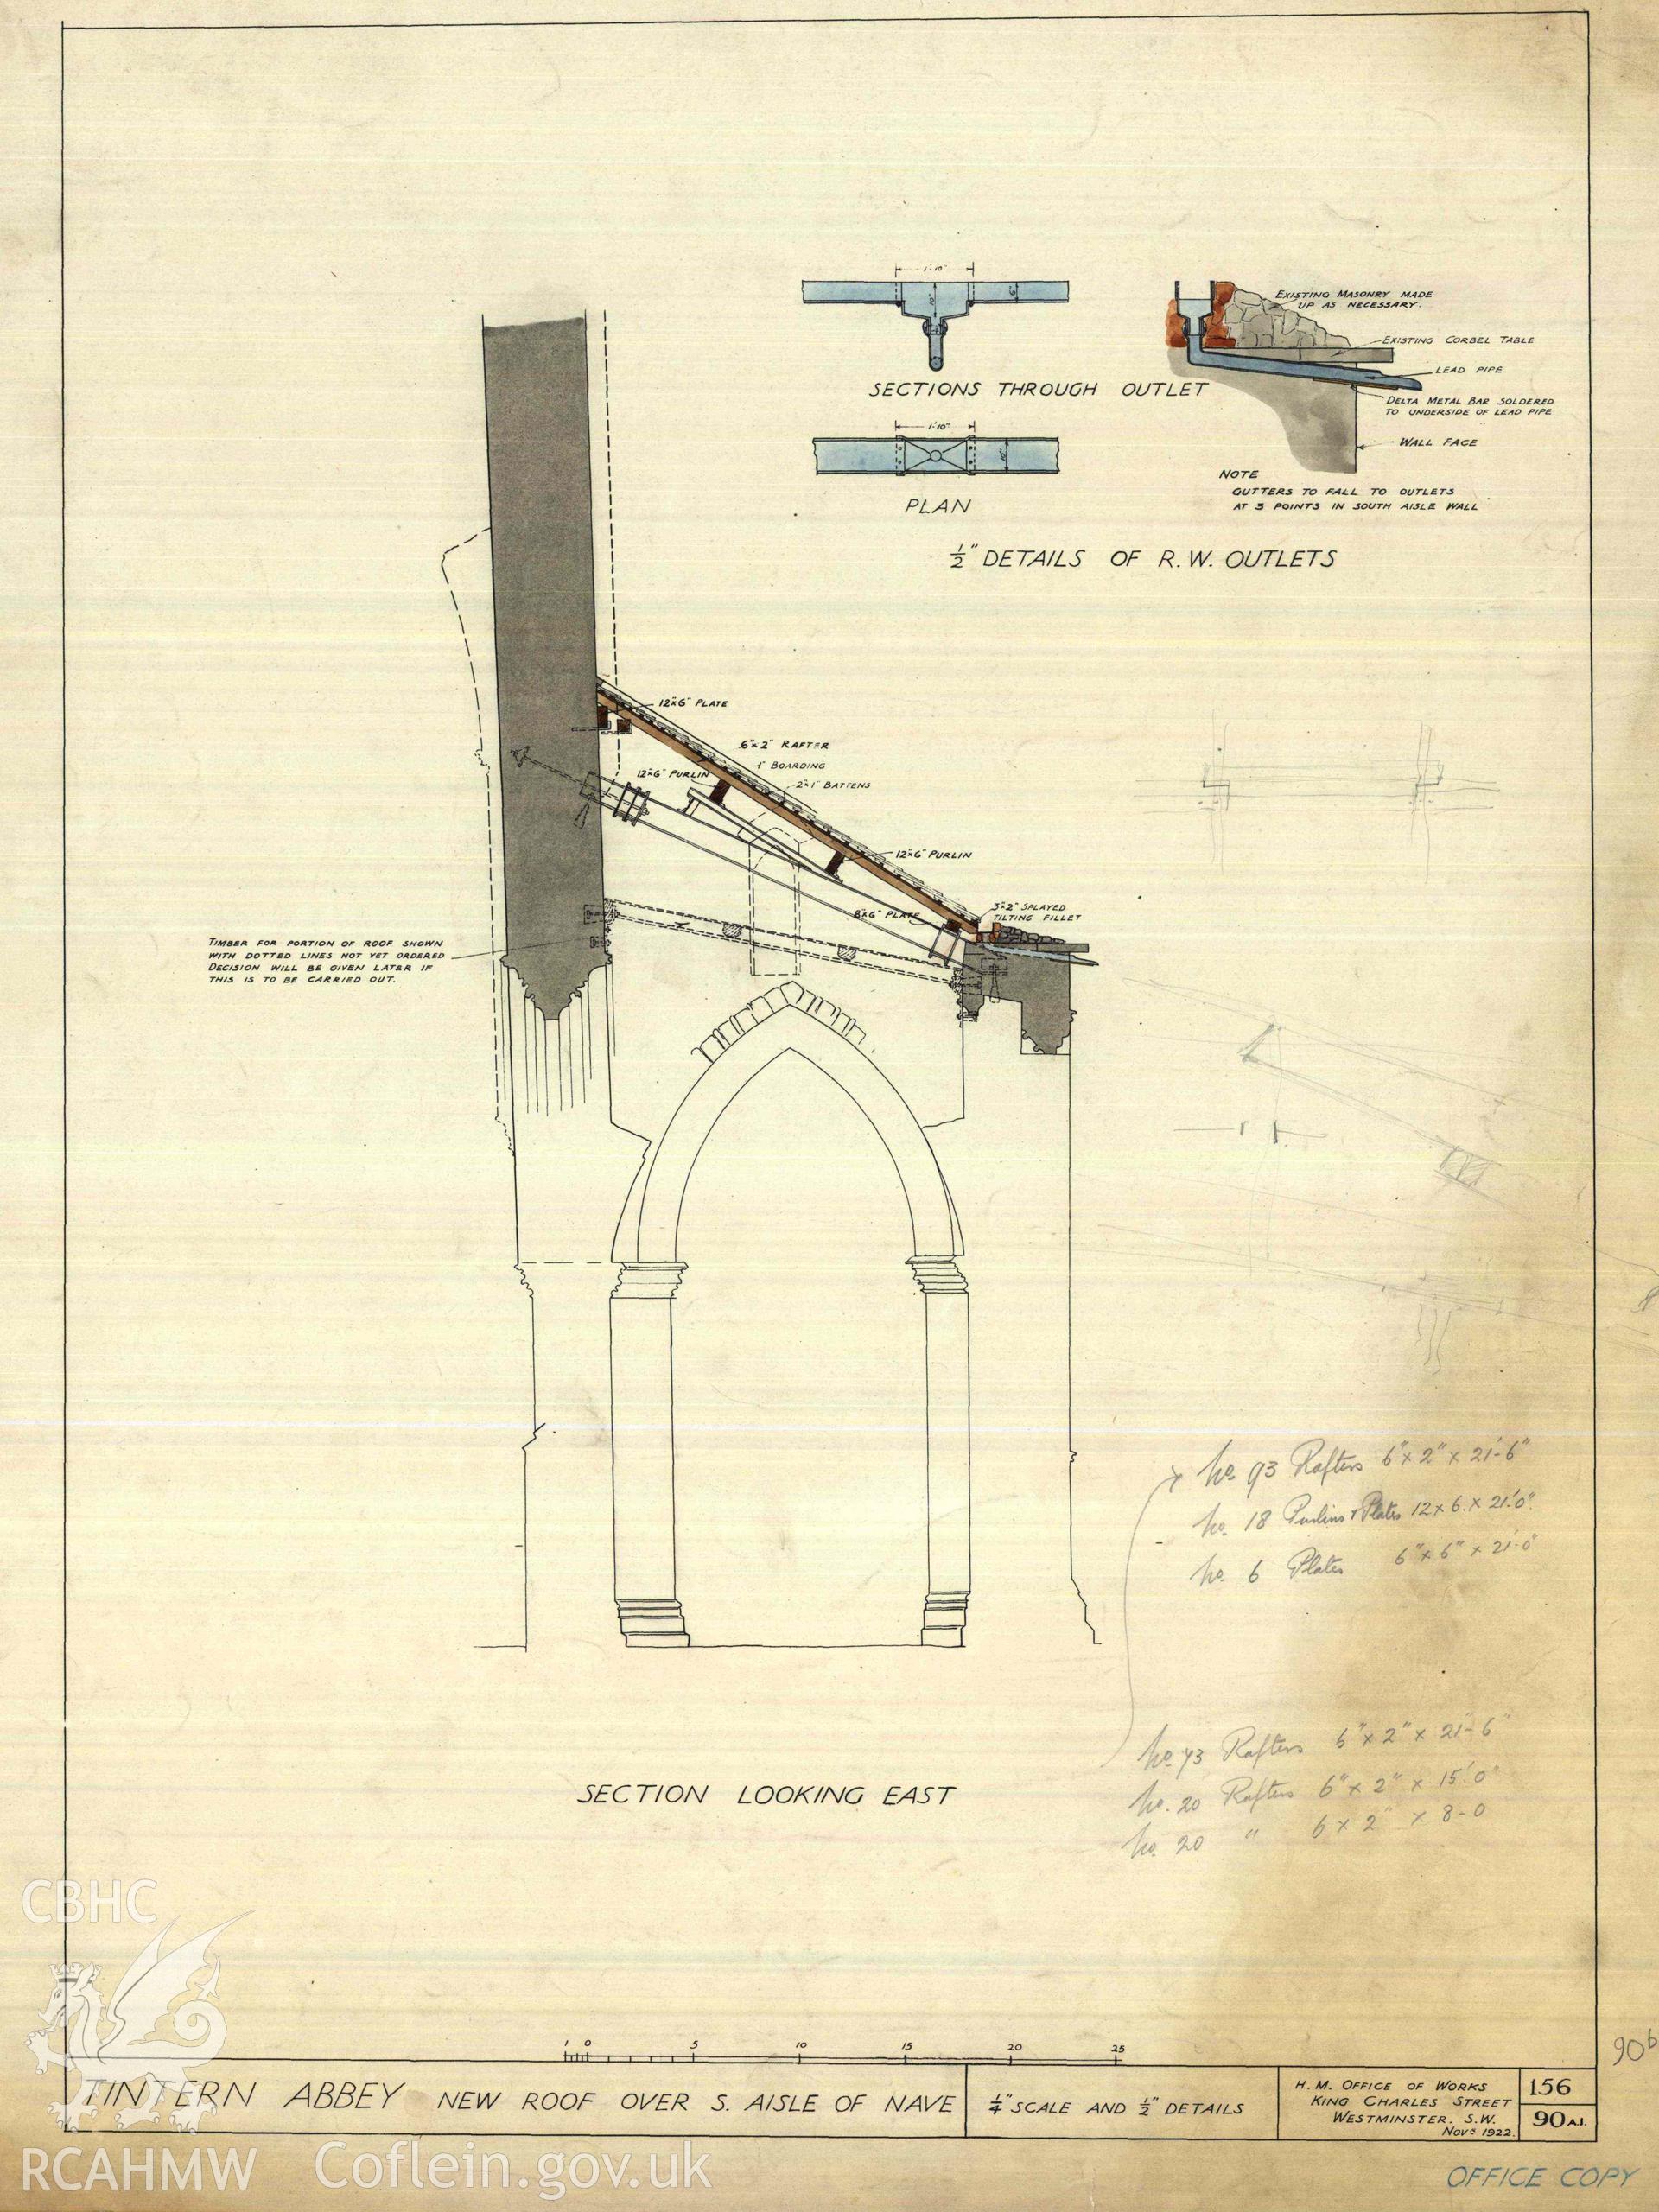 Cadw guardianship monument drawing of Tintern Abbey. New roof over S Aisle of Nave. Cadw ref. No. 156/90A1. Scale 1:24;48.